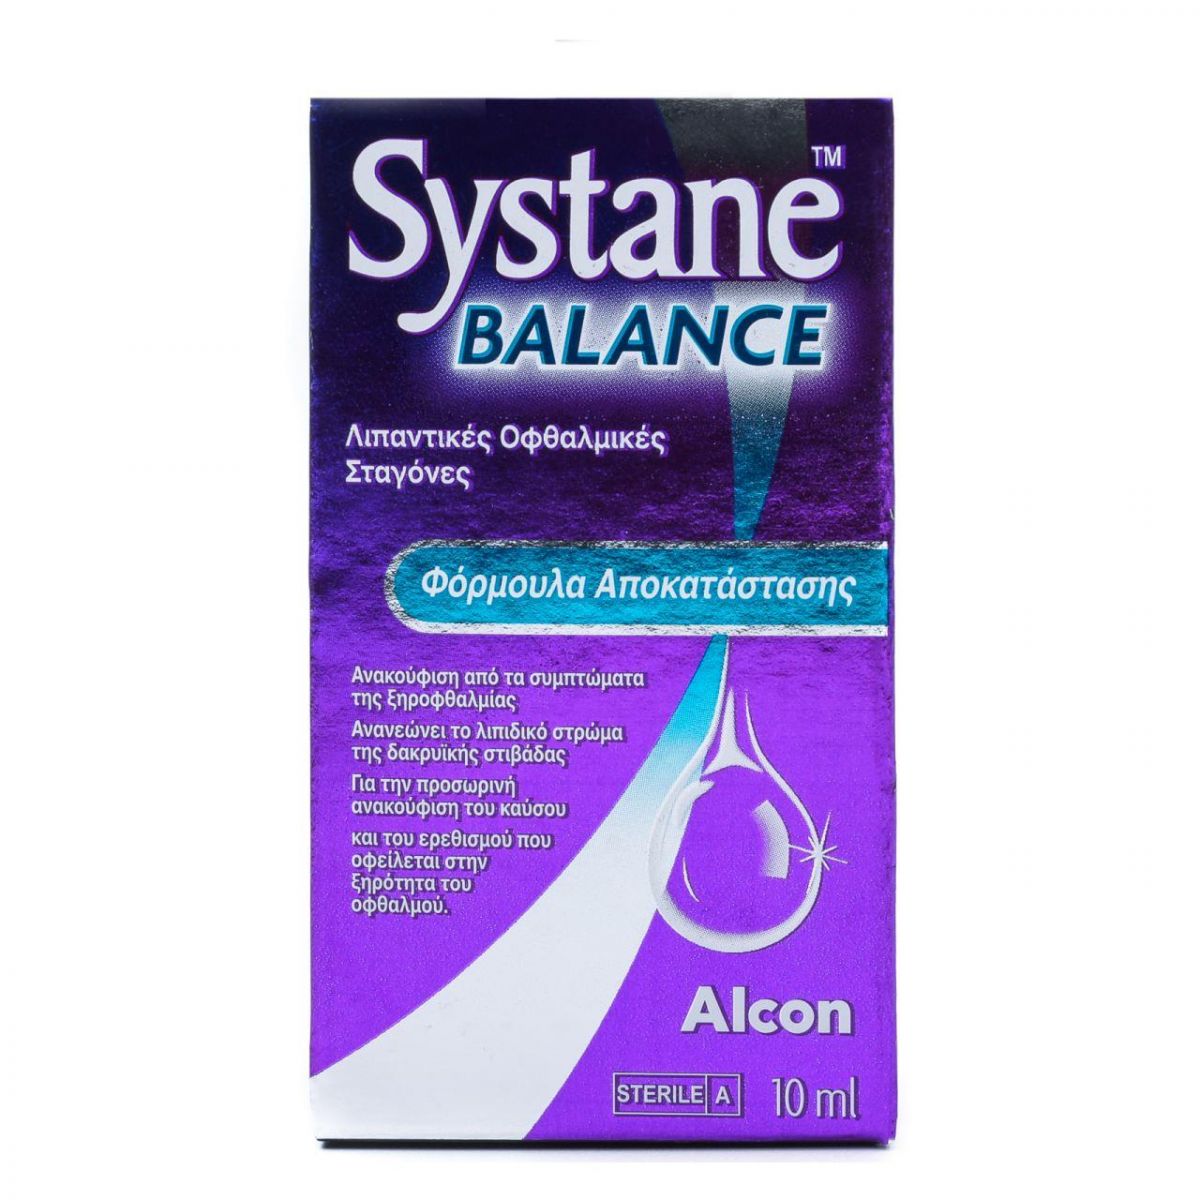 SYSTANE BALANCE CONTACT LENSES SOLUTION FOR DRY EYES 10ML